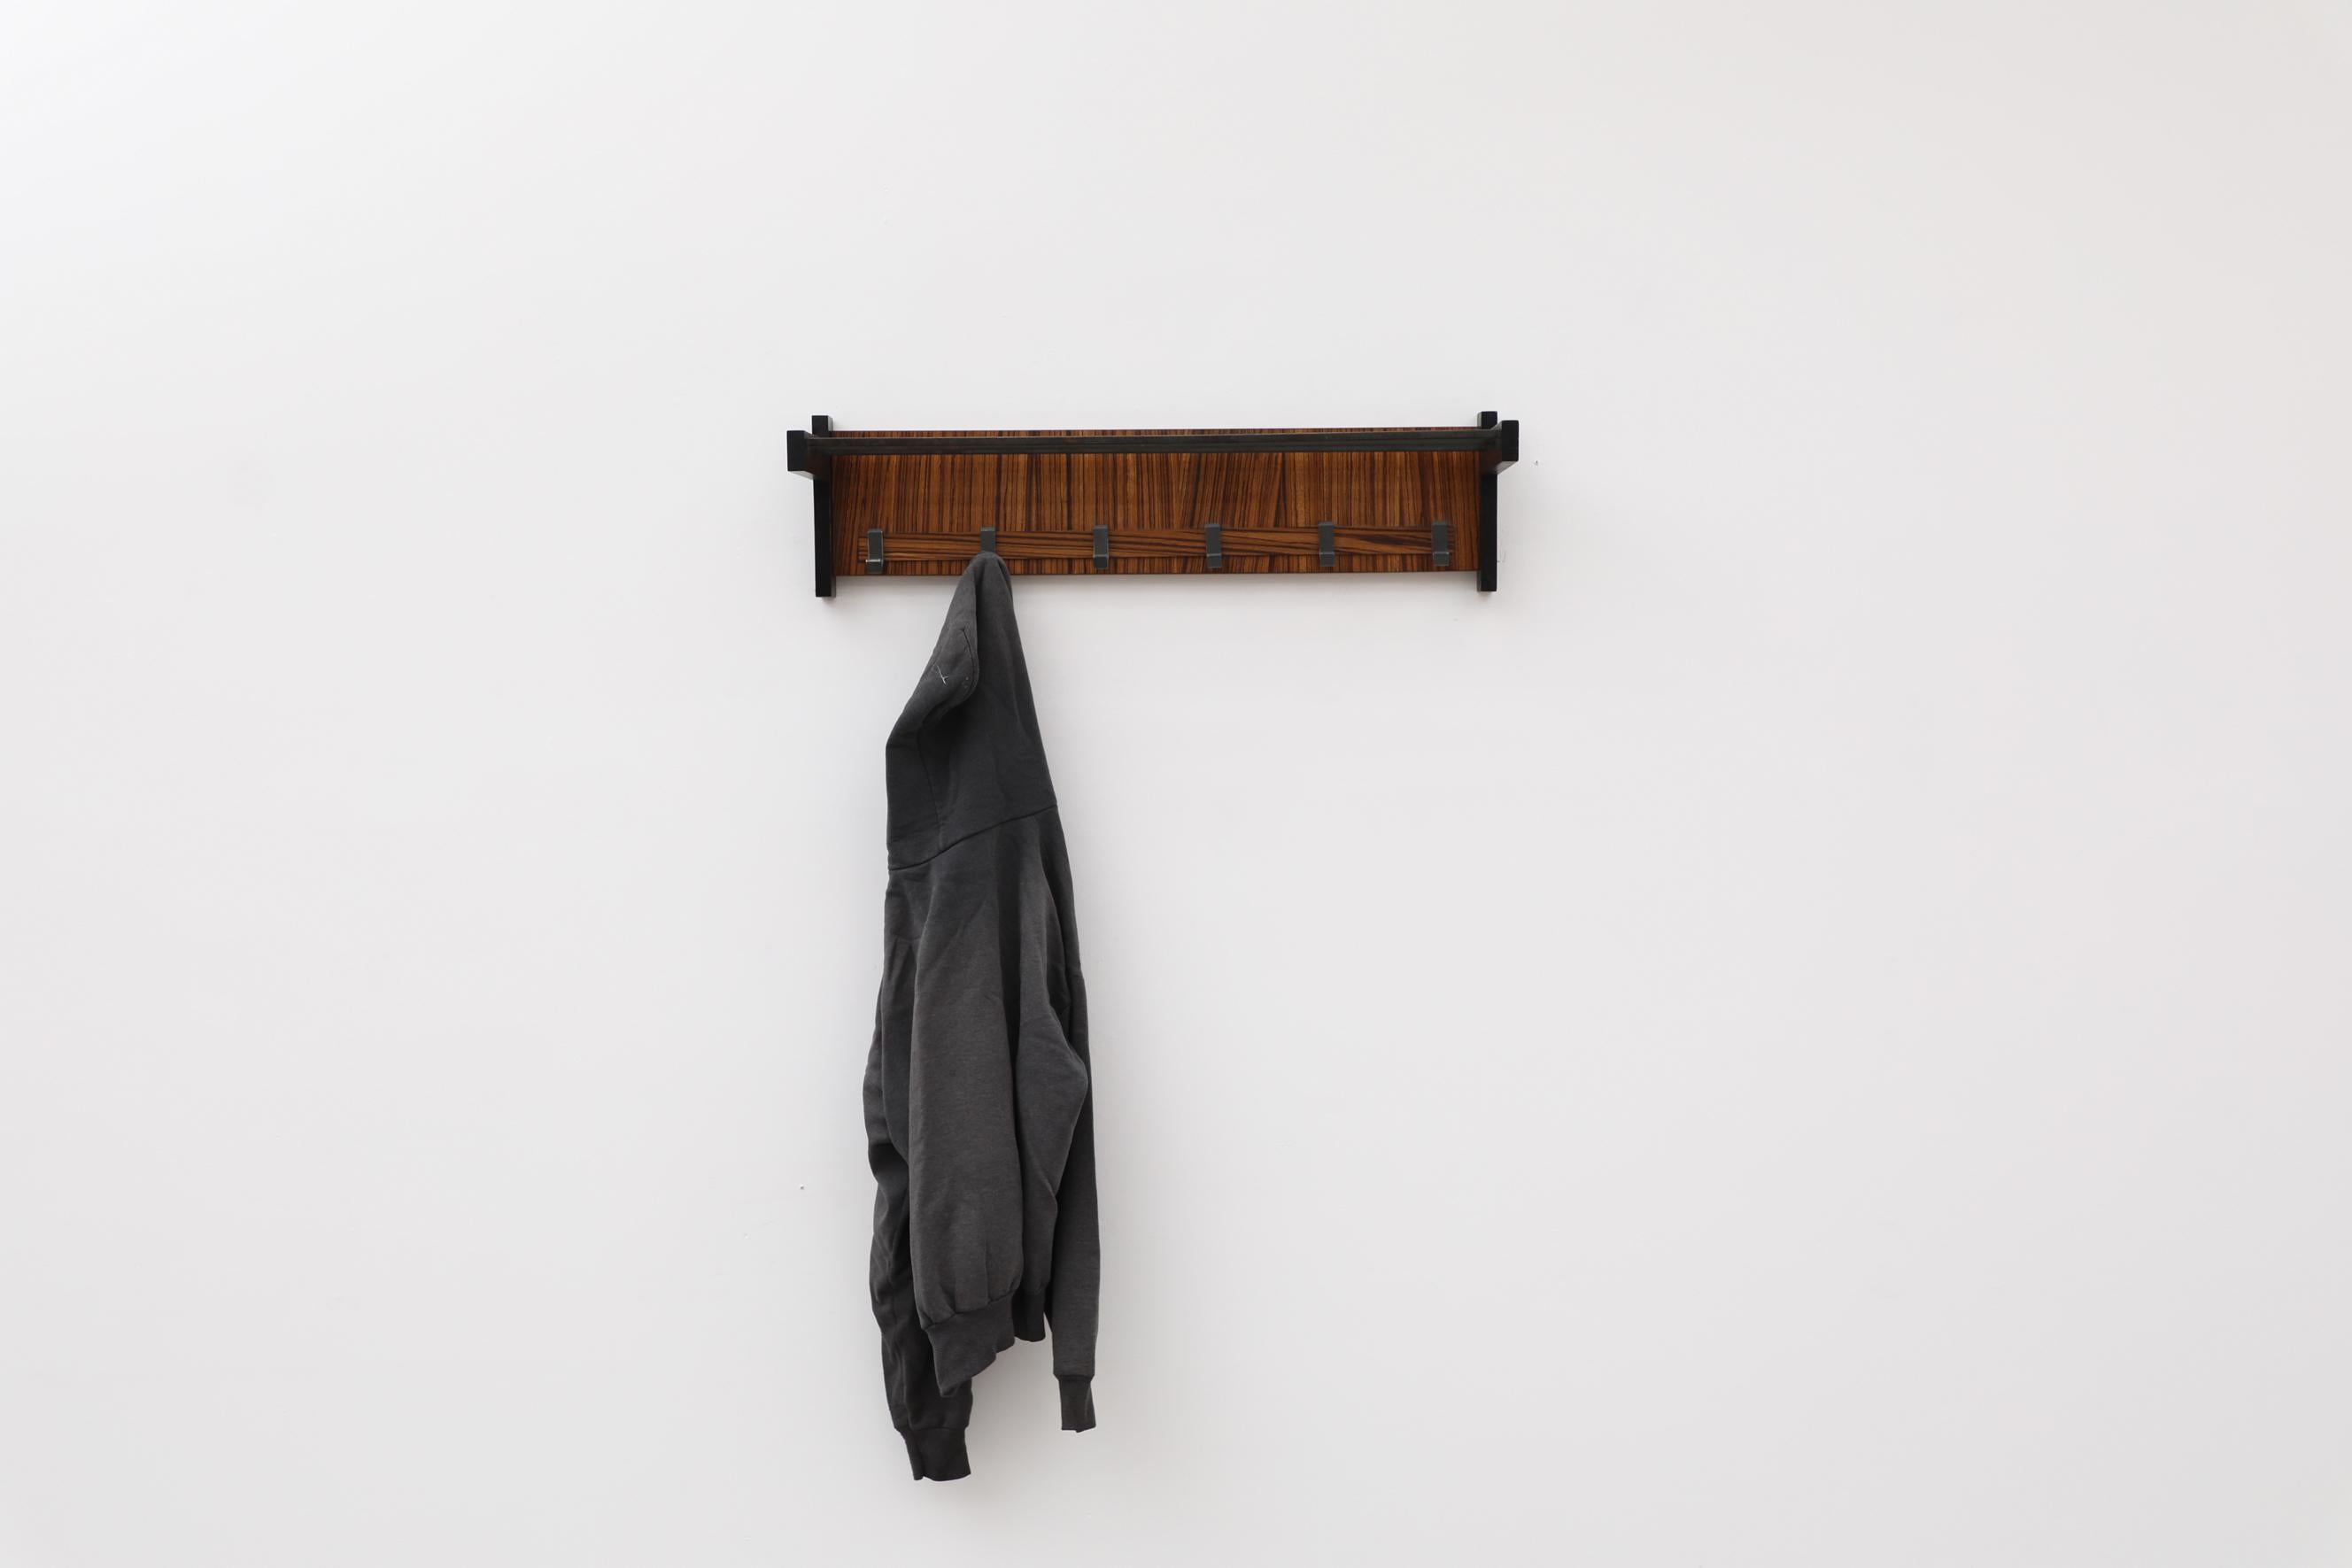 This wall mounted coat rack features 6 hooks on an cocobolo back with a metal hat rack and frame. It's in original condition with wear that's consistent with its age and use. Other wall mounted coat racks are available and listed separately.